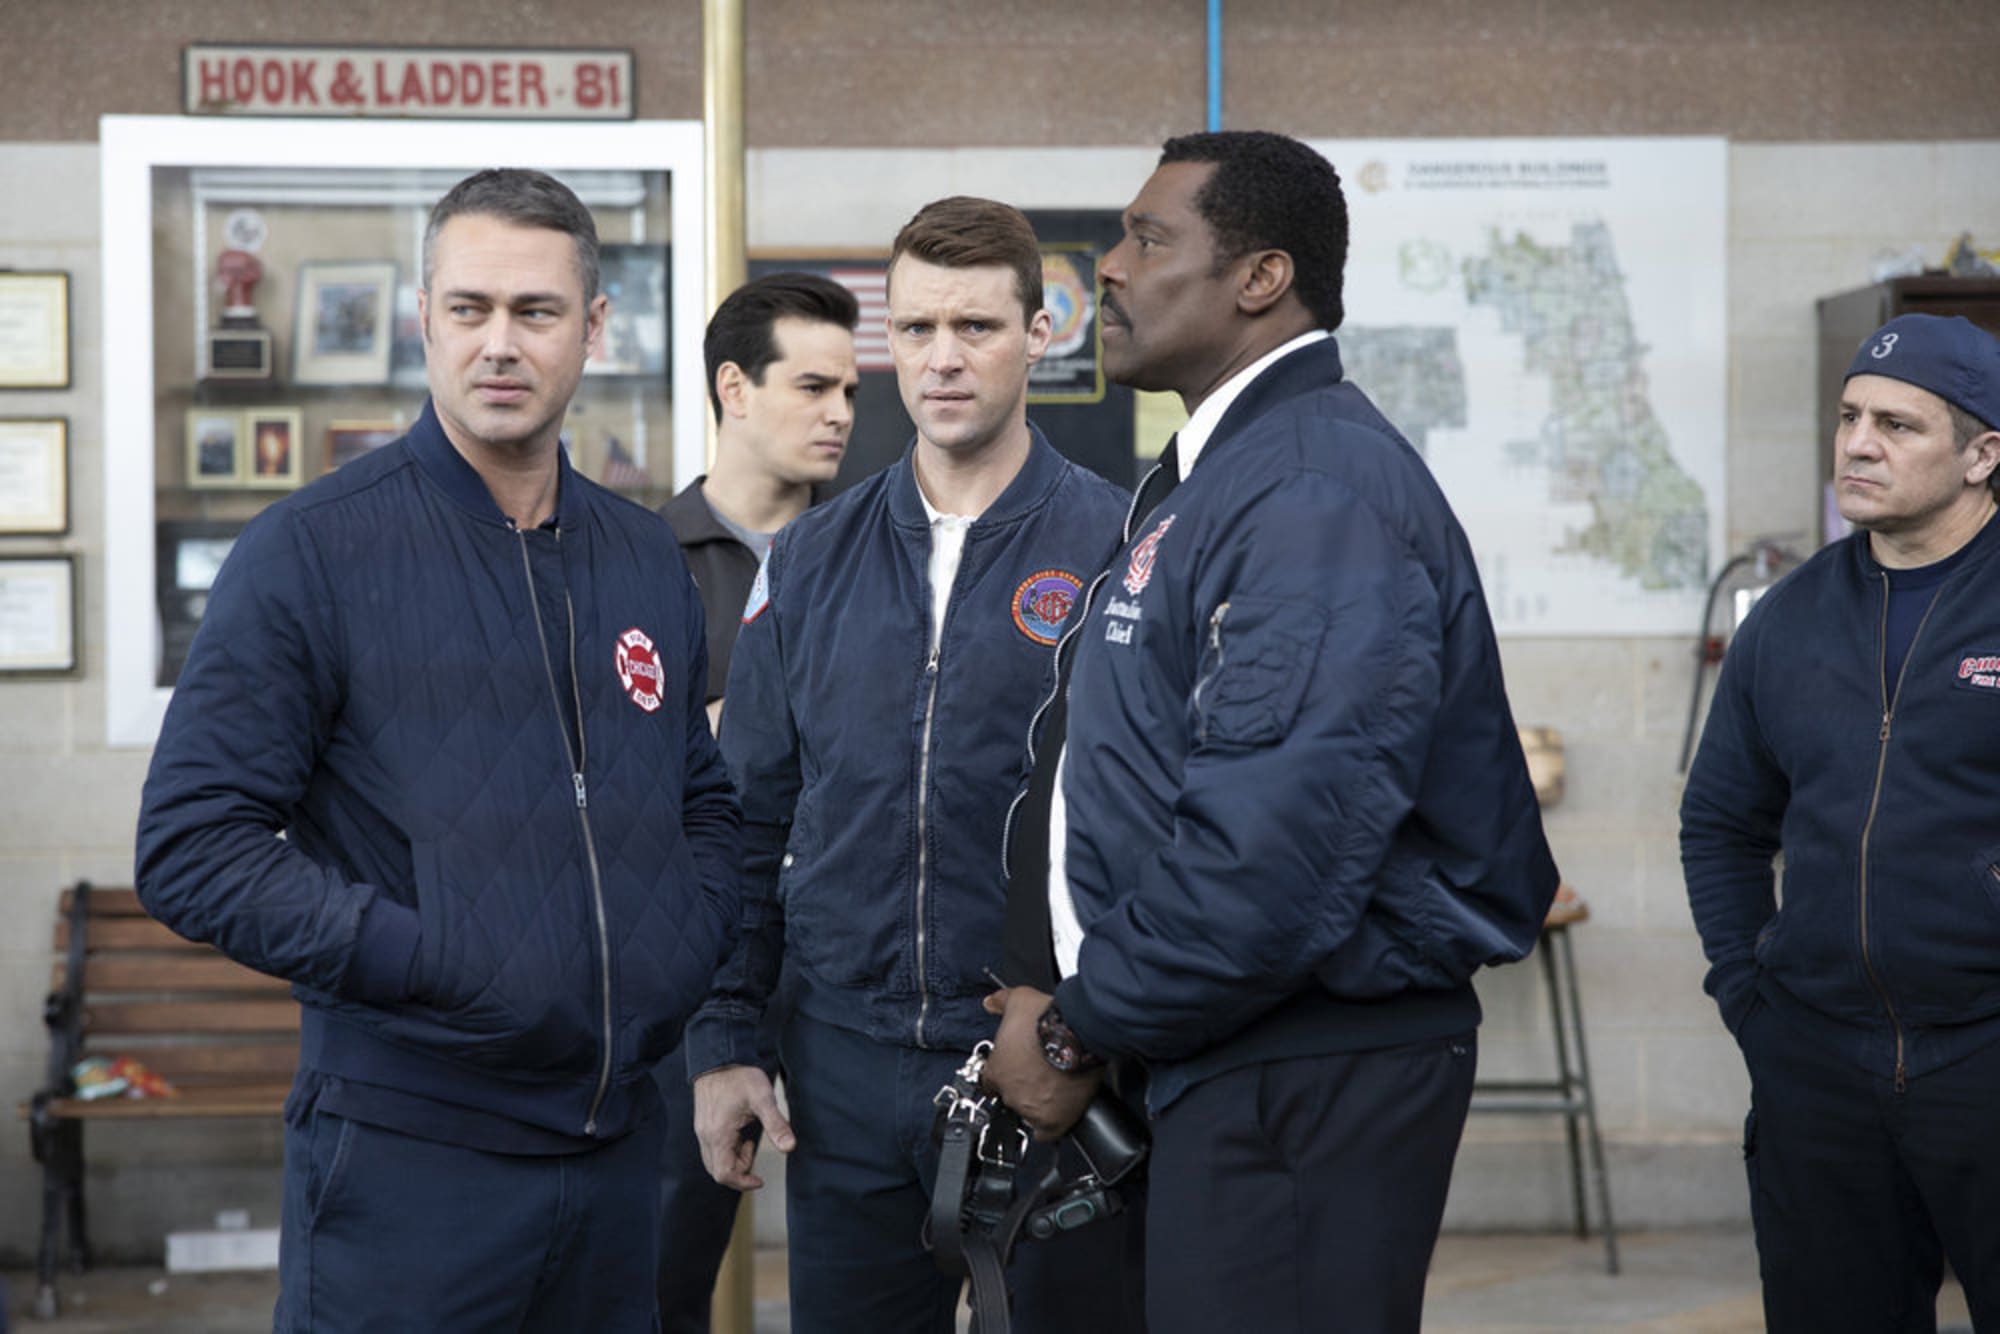 rerun of chicago fire halloween 2020 episode Chicago Fire Tv Schedule For August 2020 This Month S Reruns rerun of chicago fire halloween 2020 episode